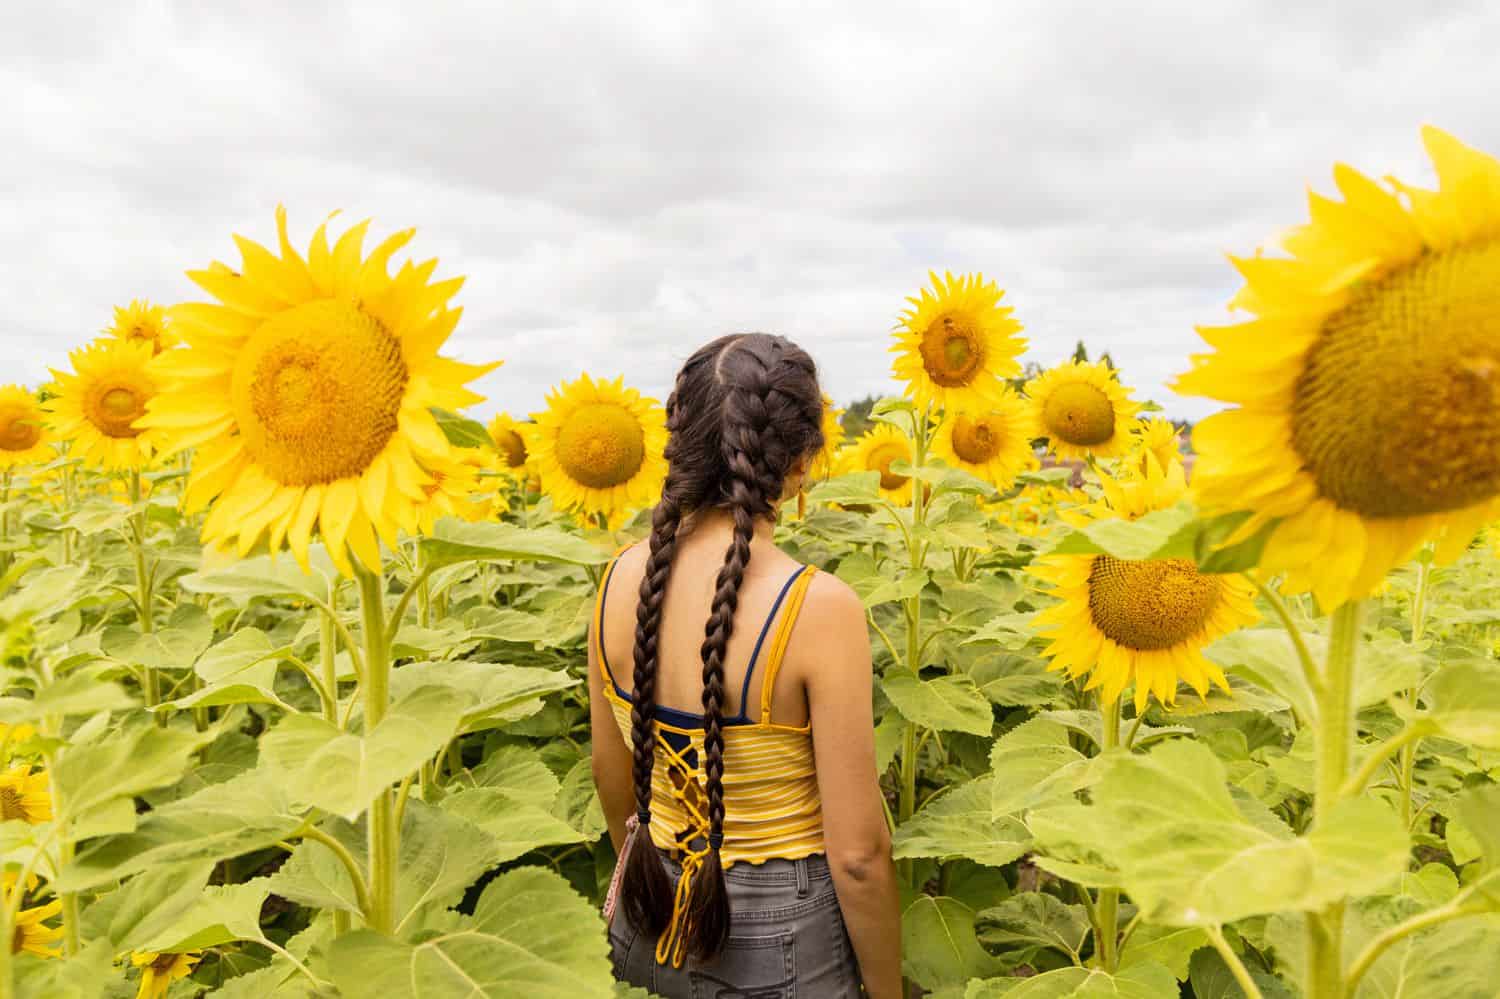 A young woman with waist-length braids is photographed in a sunflower field by photographer Sofia Angelina